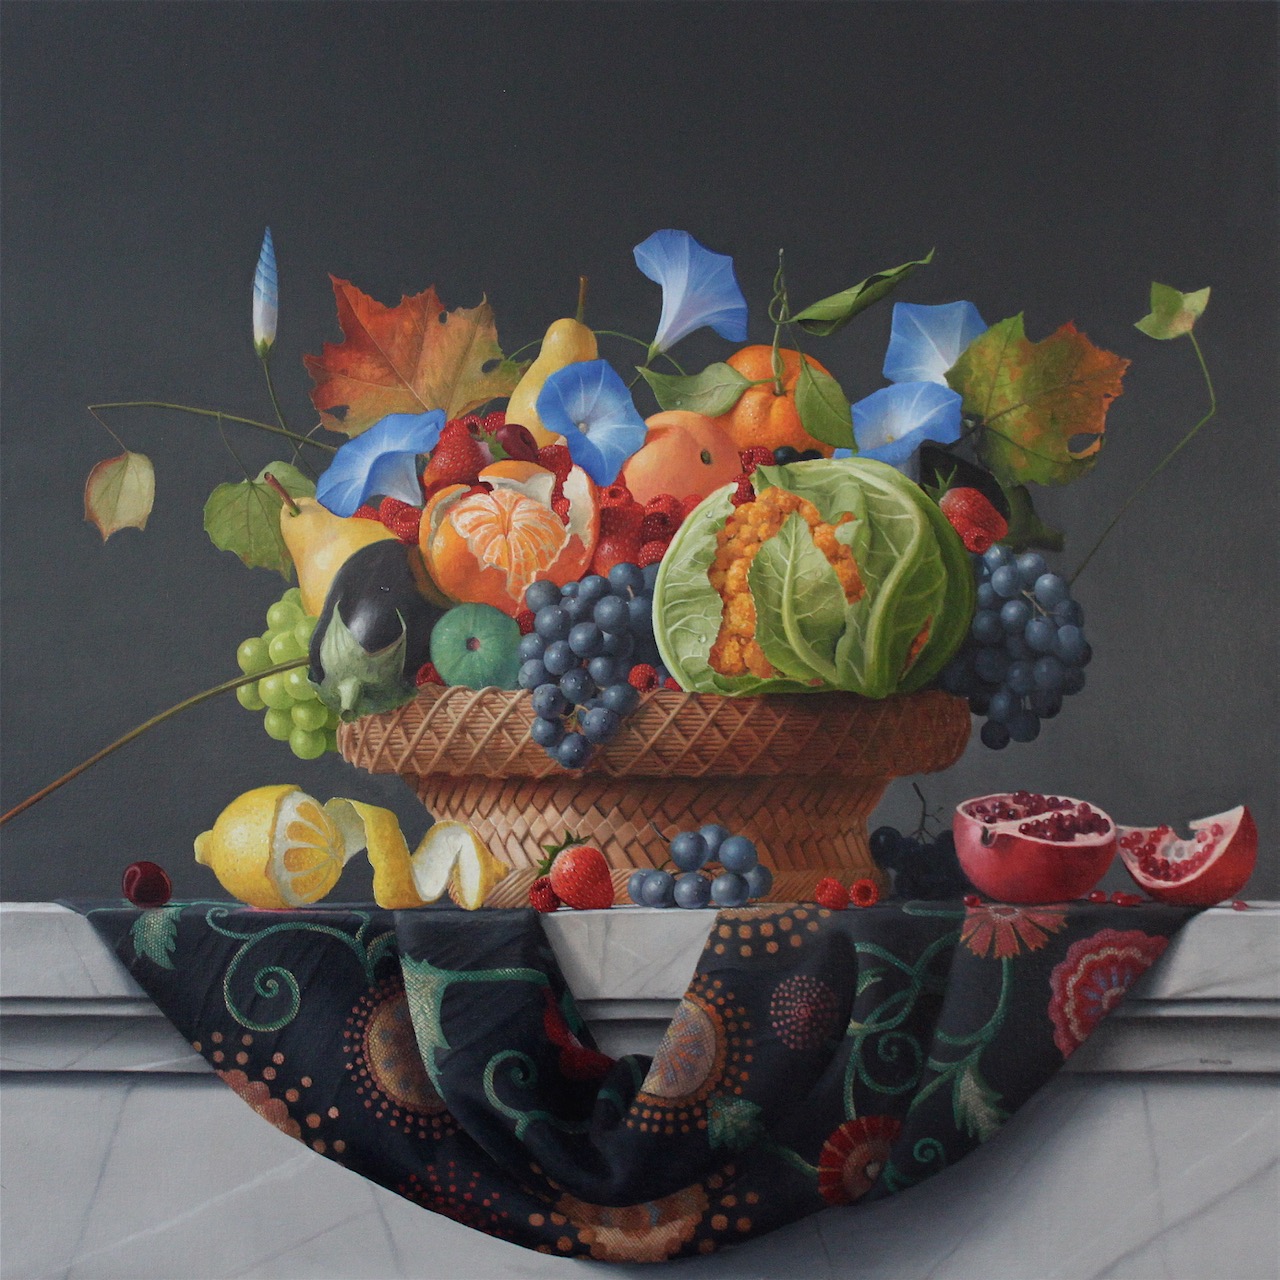 Aponovich Basket of Fruit and Vegetables oil on canvas 26in x 26in